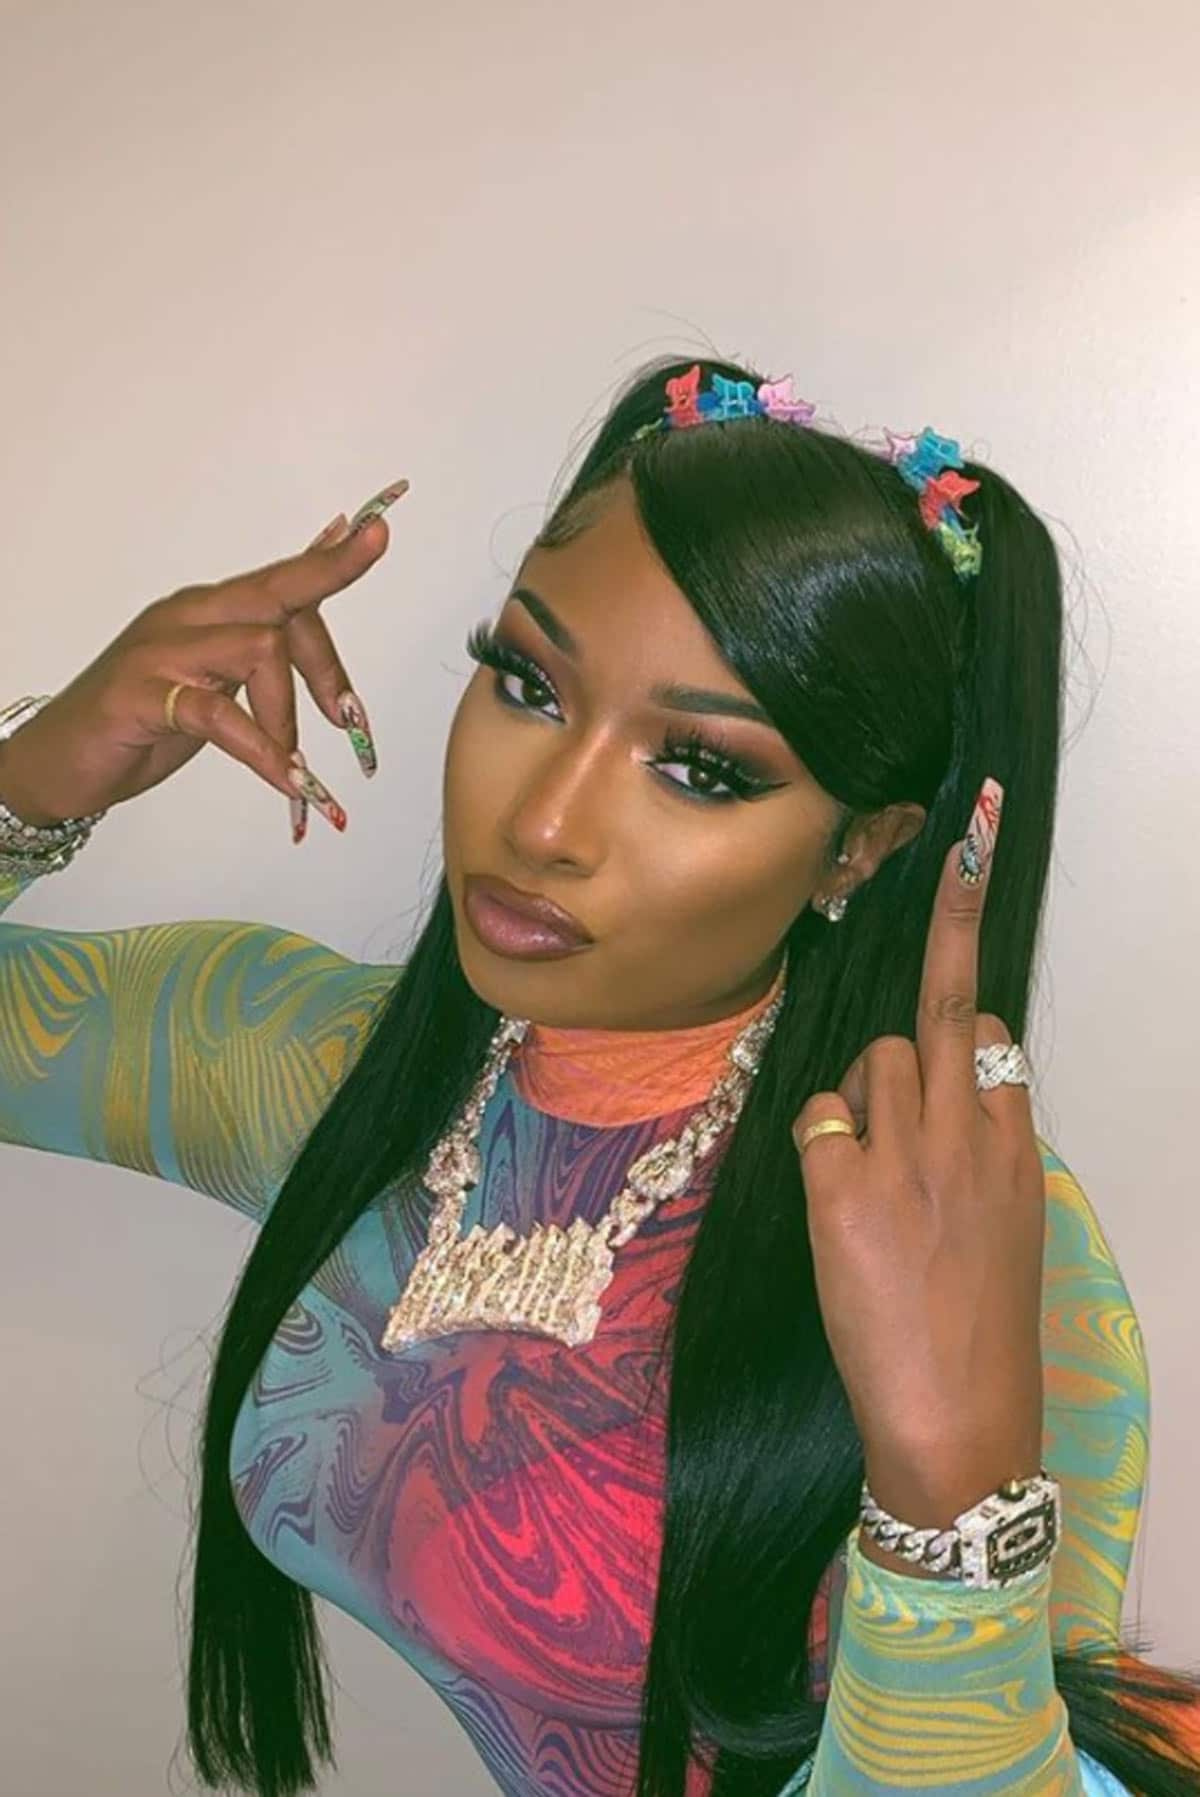 Misogynoir forced Megan Thee Stallion to prove that Tory Lanez shot her